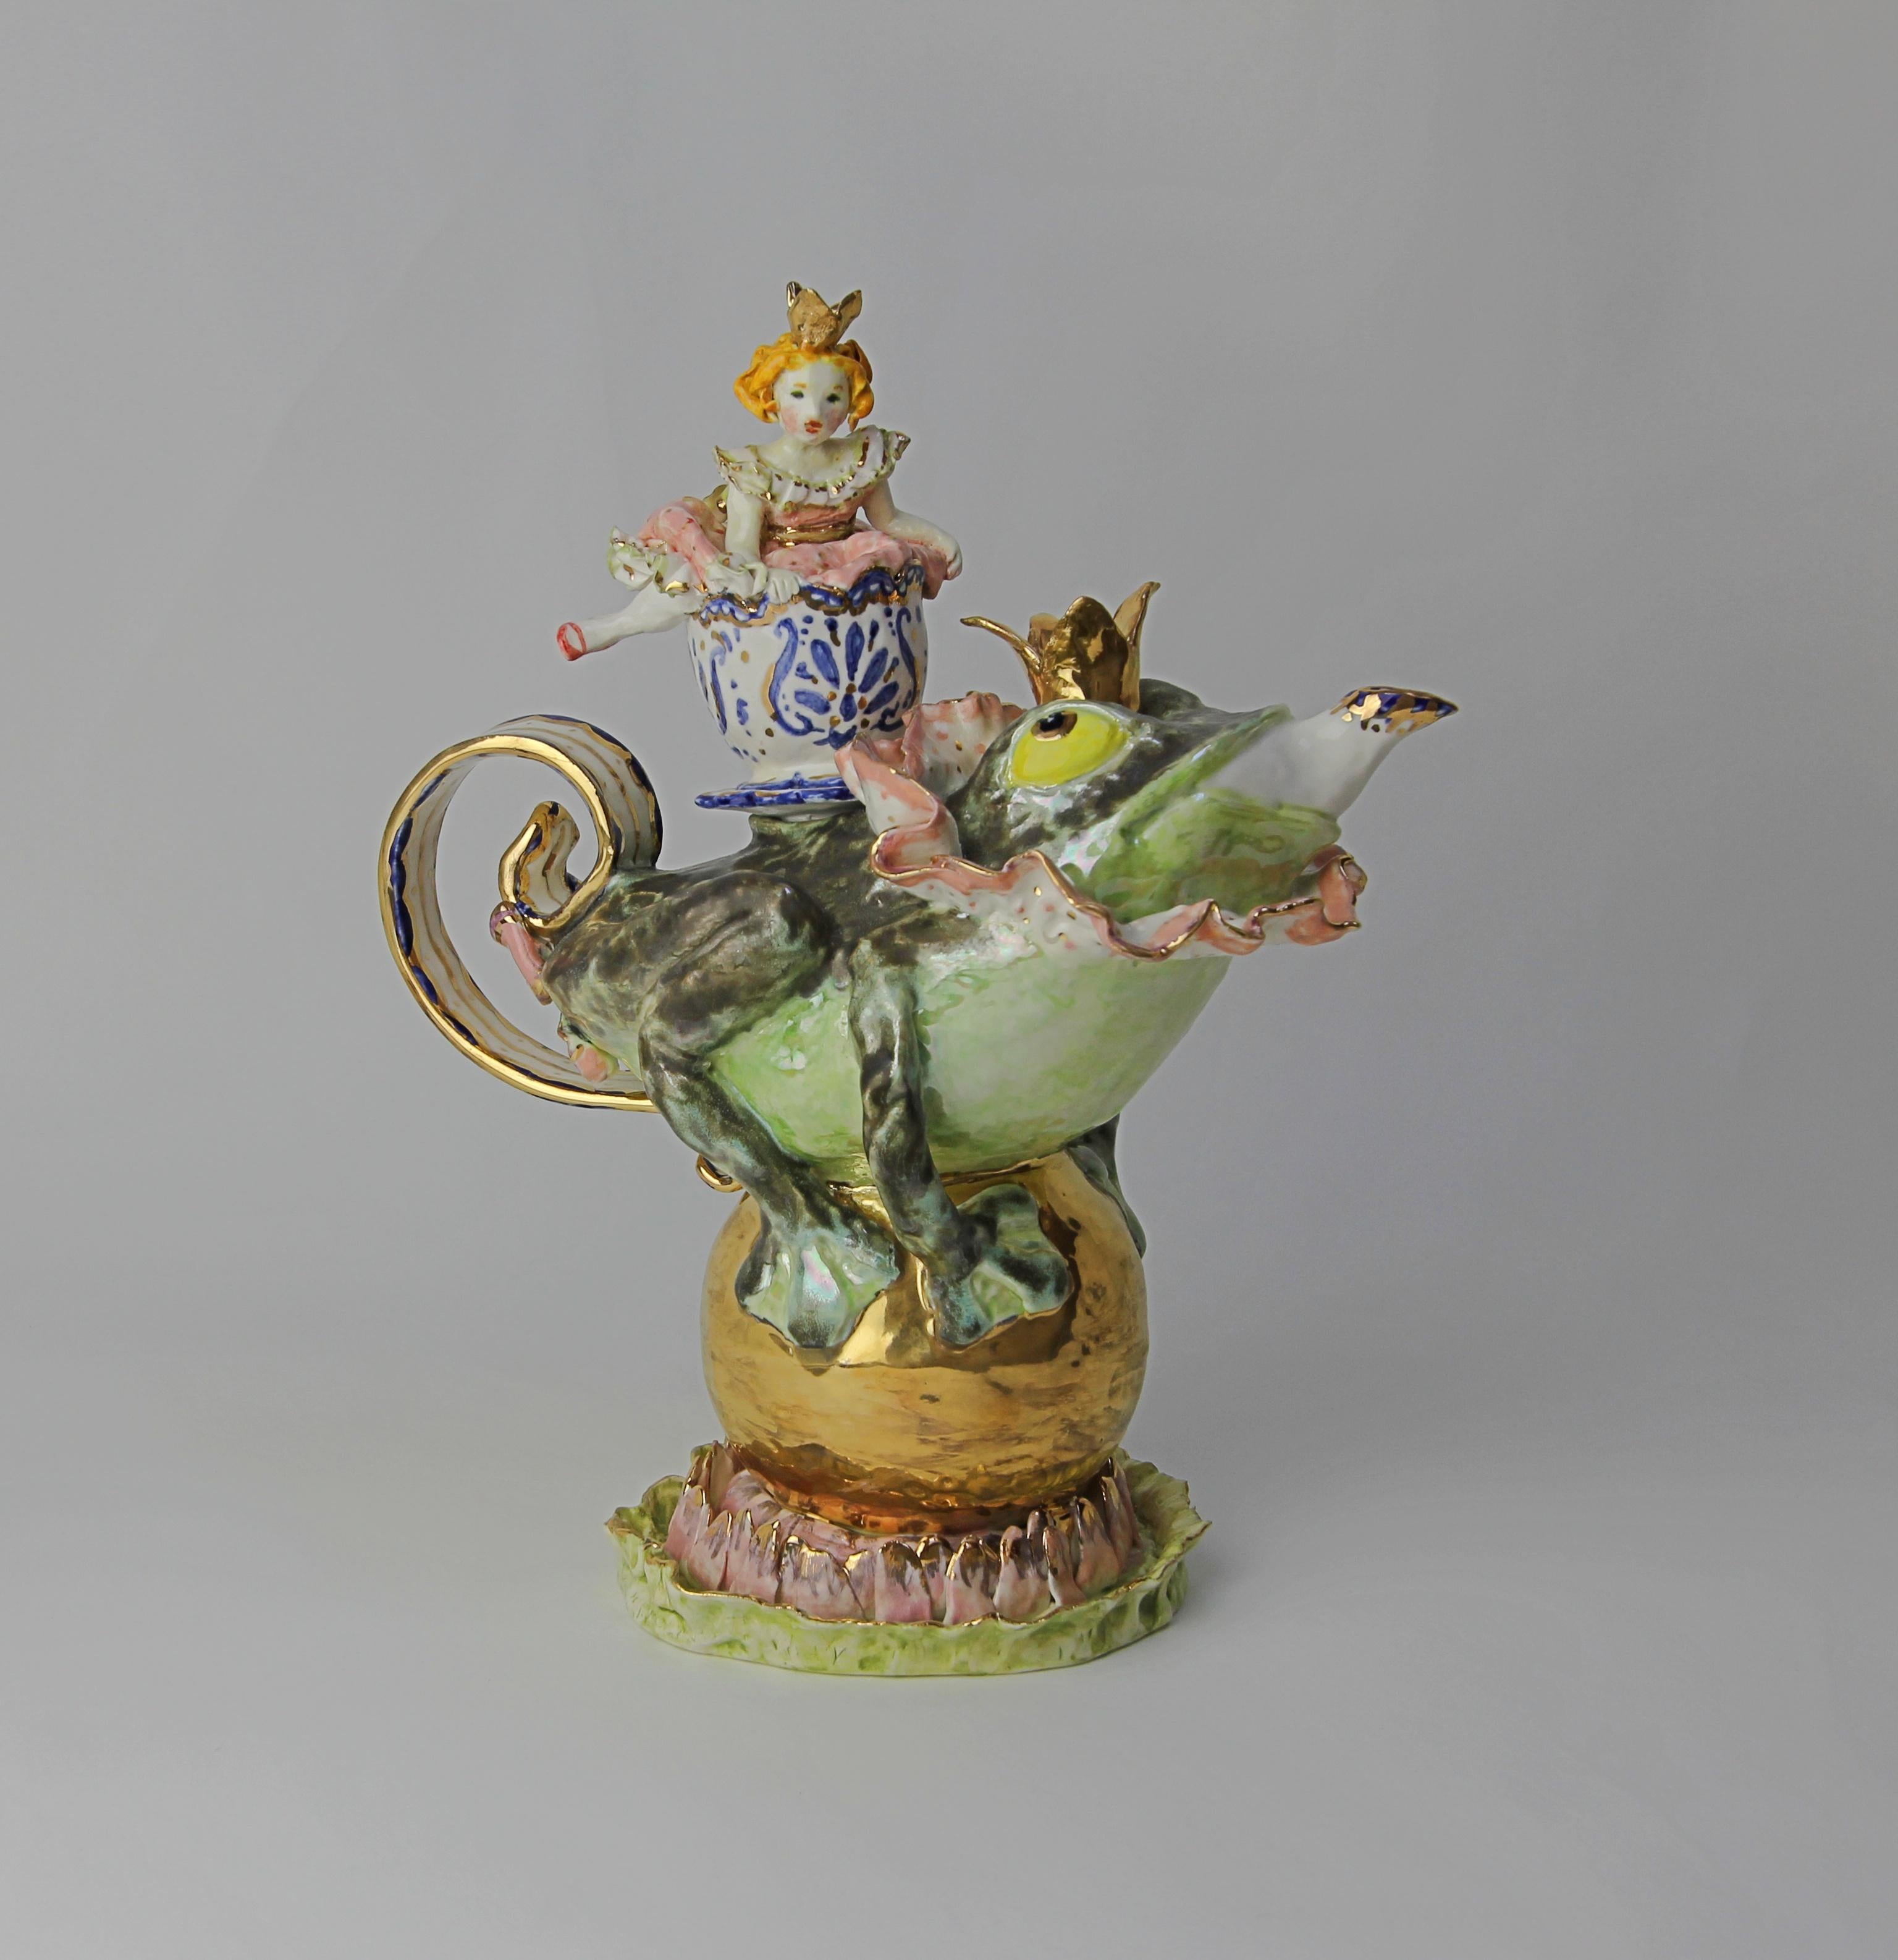 Baroque The Frog Prince Porcelain Piece, Handmade in Italy, Handcrafted Design 2021 For Sale